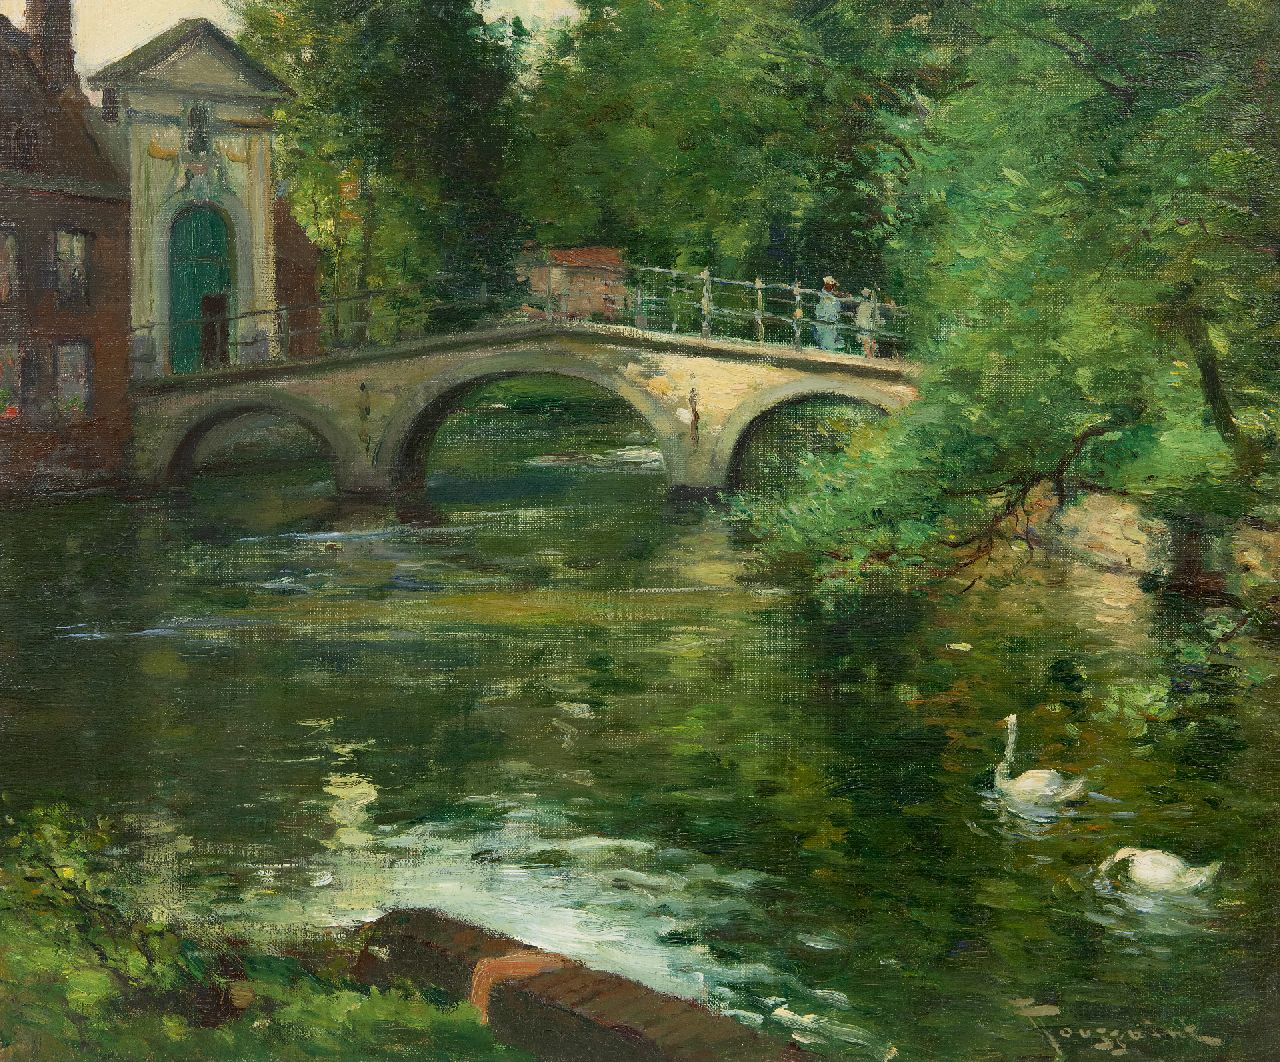 Toussaint F.  | Fernand Toussaint | Paintings offered for sale | Swans in the canal at the Begijnhofpoort in Bruges, oil on painter's board 46.1 x 54.9 cm, signed l.r.